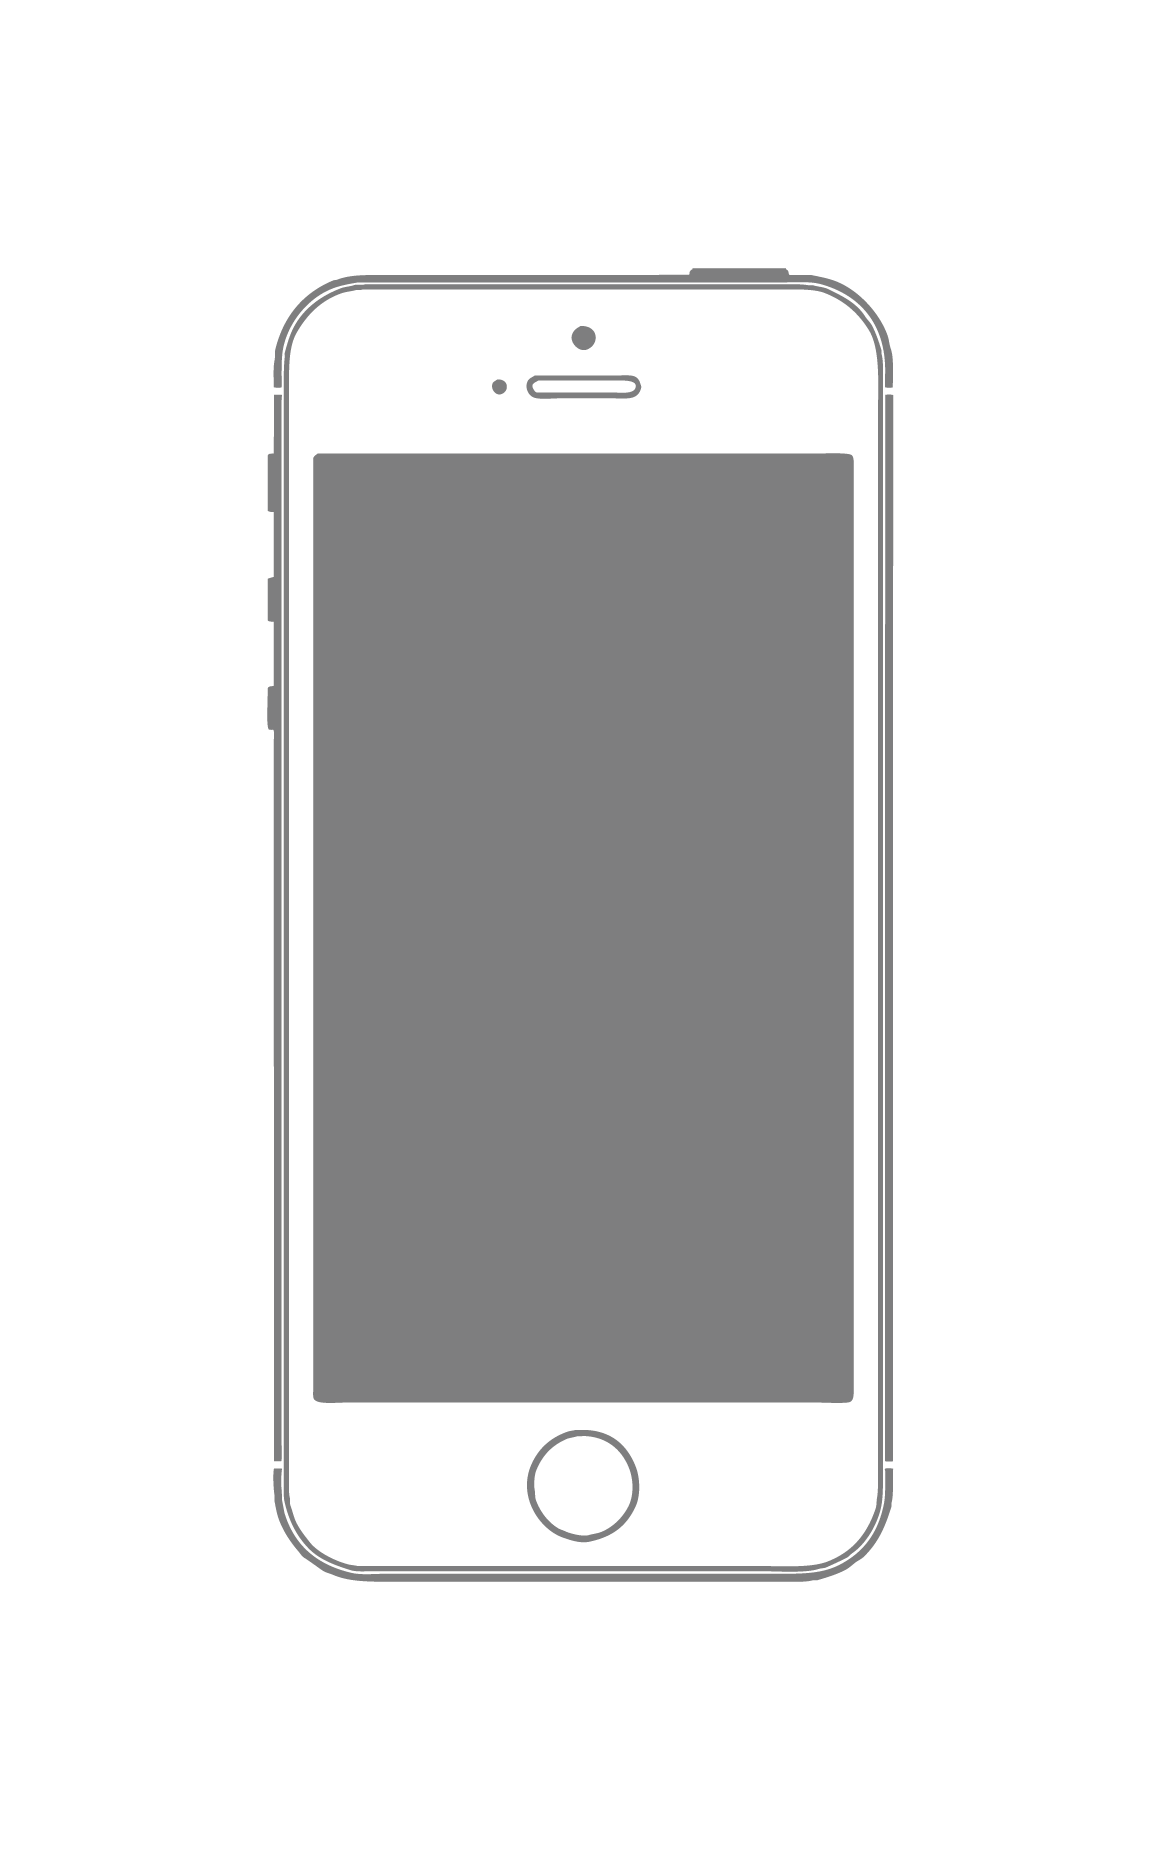 Download Smartphone Mobile Frame Material Feature Phone Vector HQ PNG